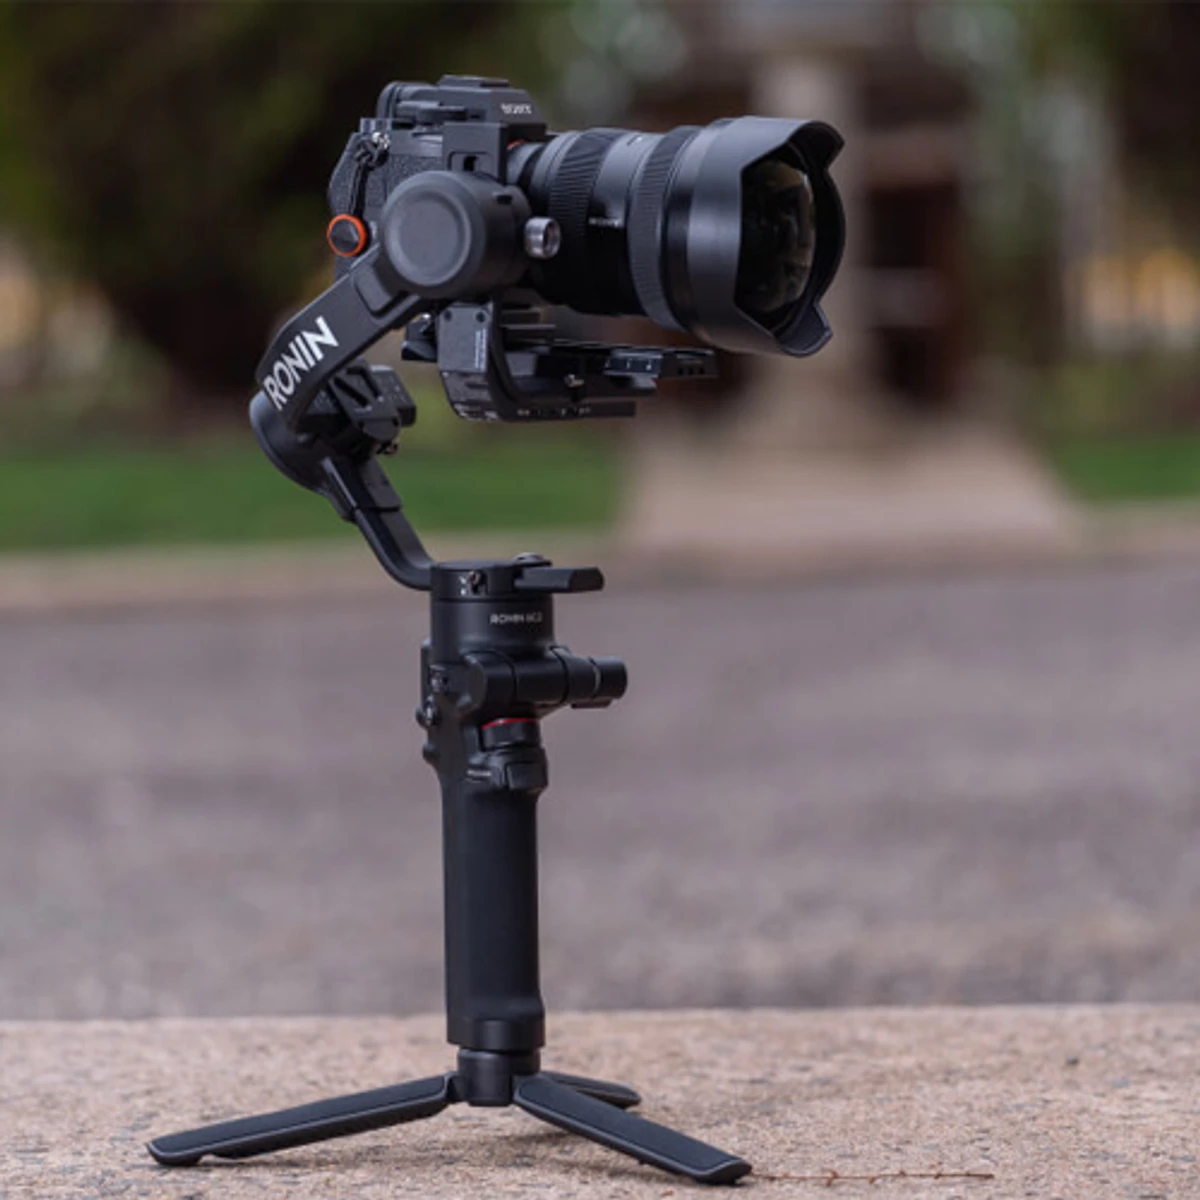 DJI RSC 2 - 3 Axis Gimbal Stabilizer For Mirrorless And DSLR Cameras